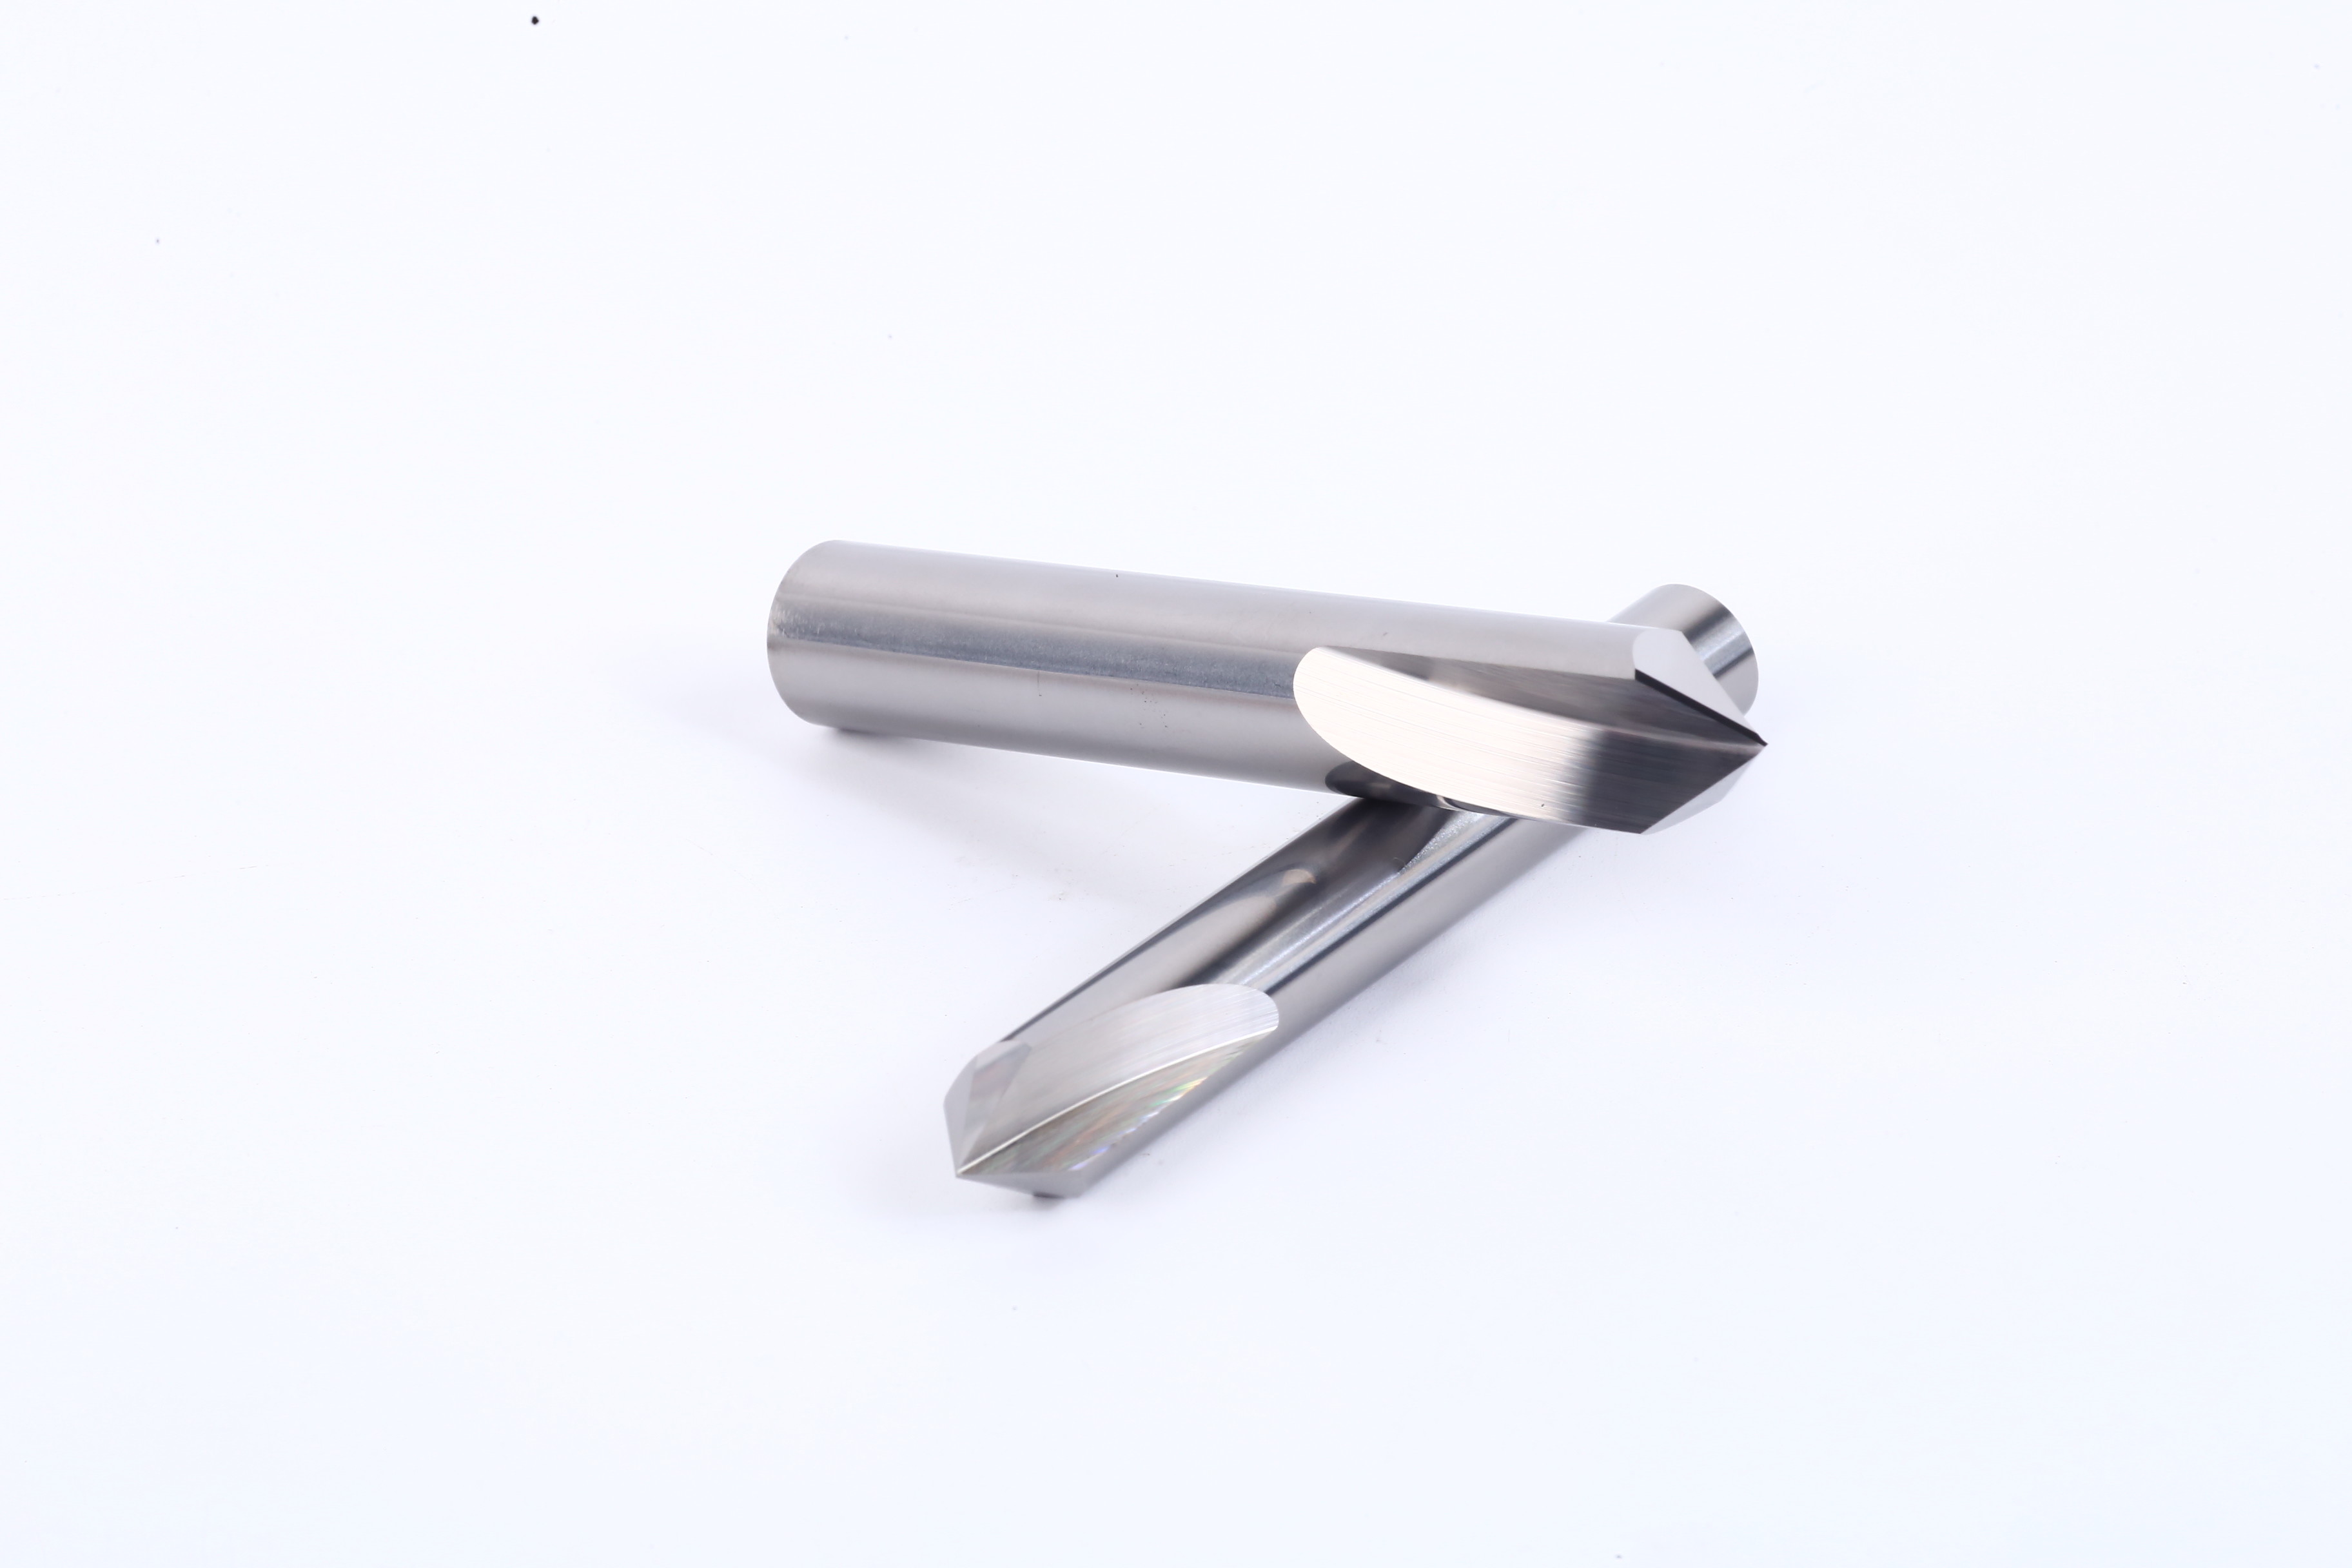 Chamfering Chamfer End Mill 3-4 Flutes Cutting Width 0.5-2.0mm Flute Length 3-4 Flutes